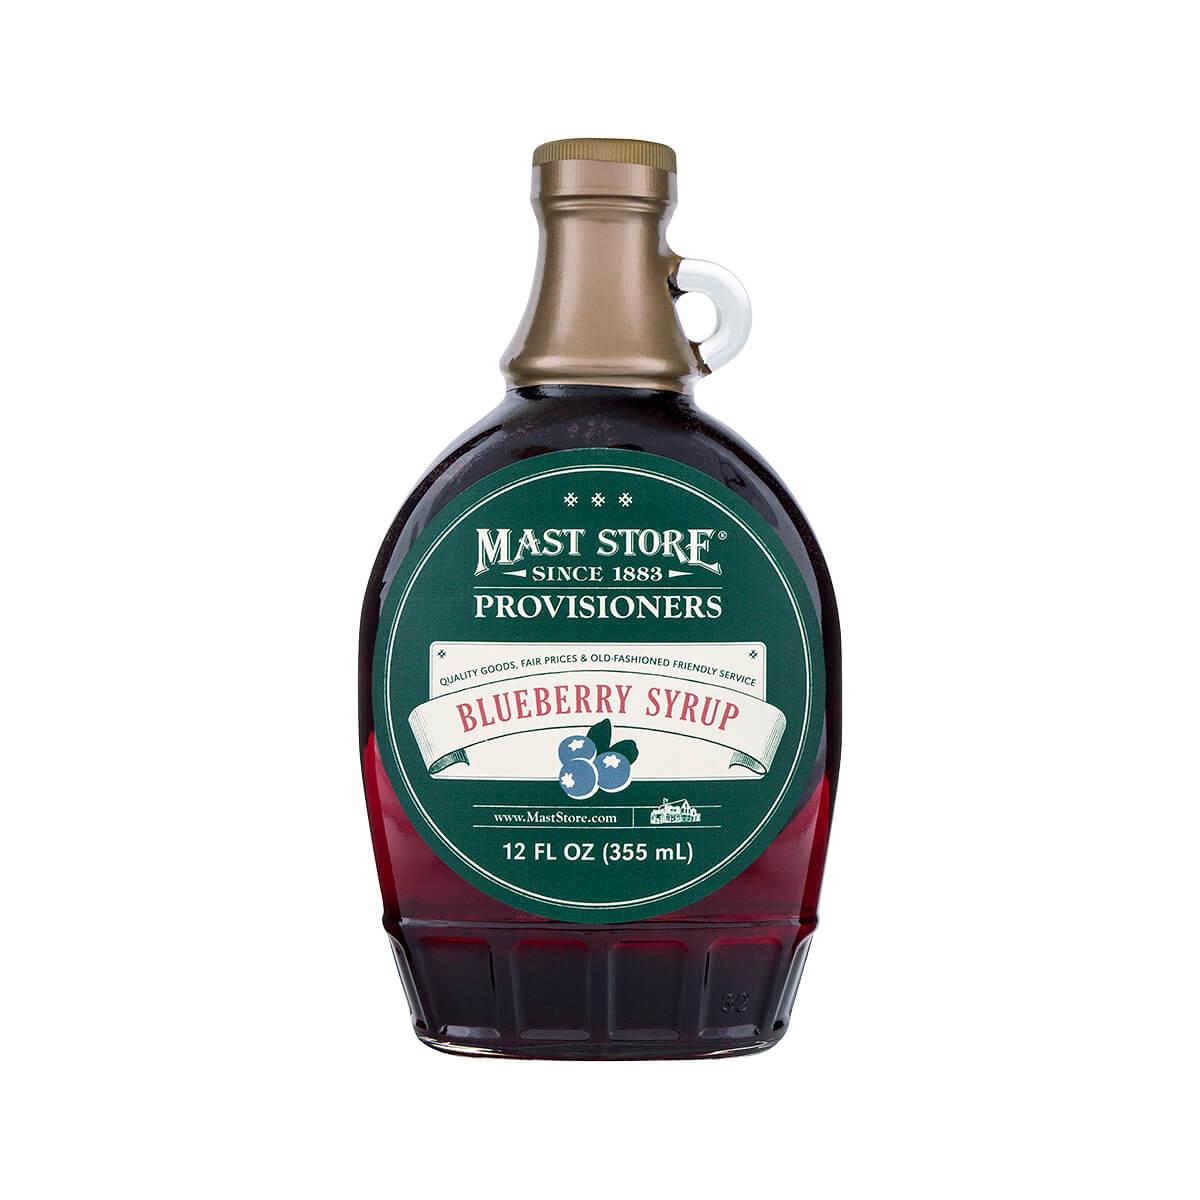  Mast Store Provisioners Blueberry Syrup